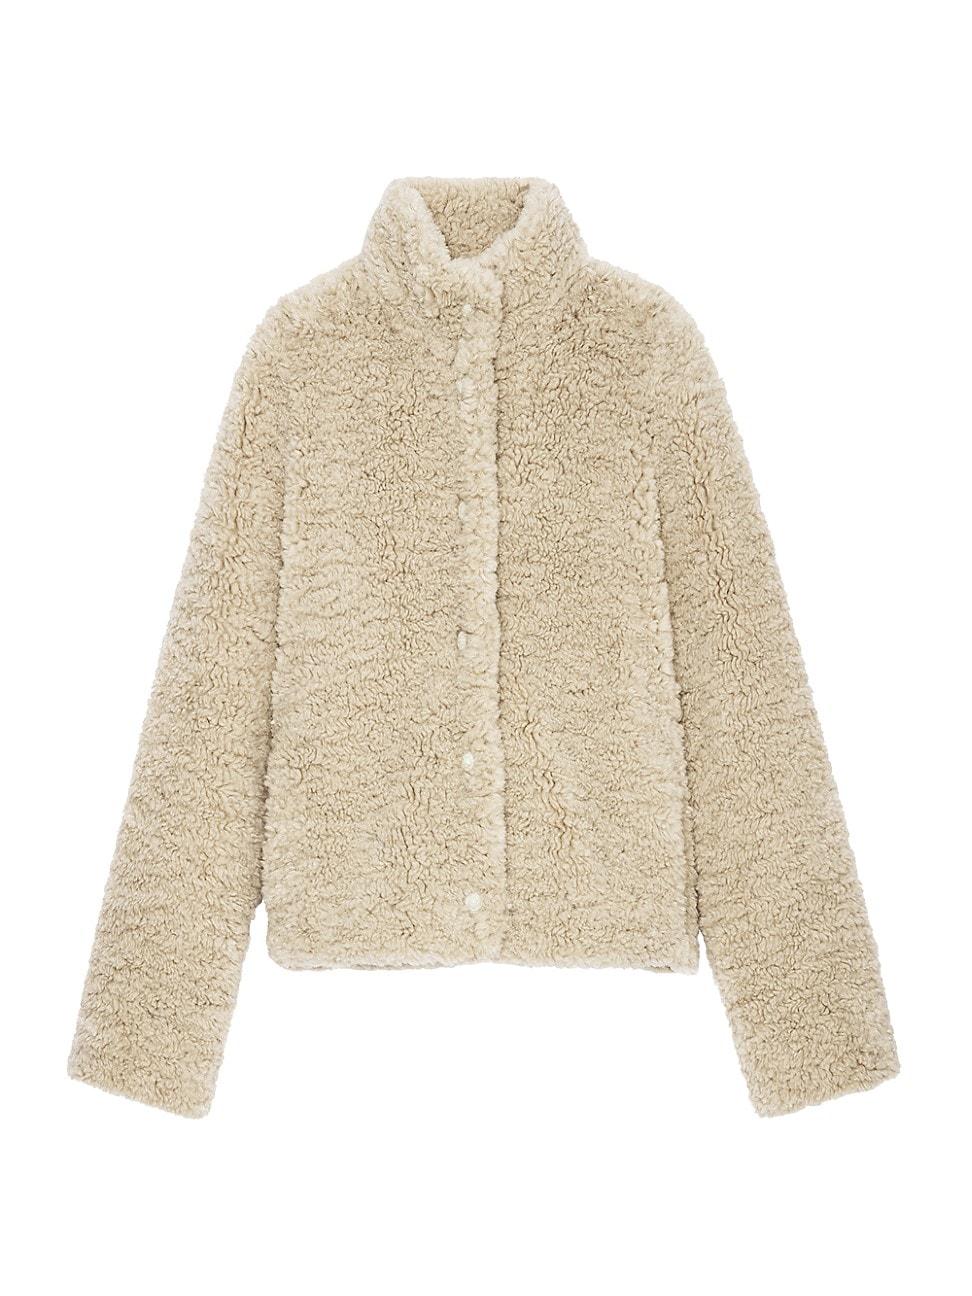 Zadig & Voltaire Fino Sherpa Jacket in Natural | Lyst